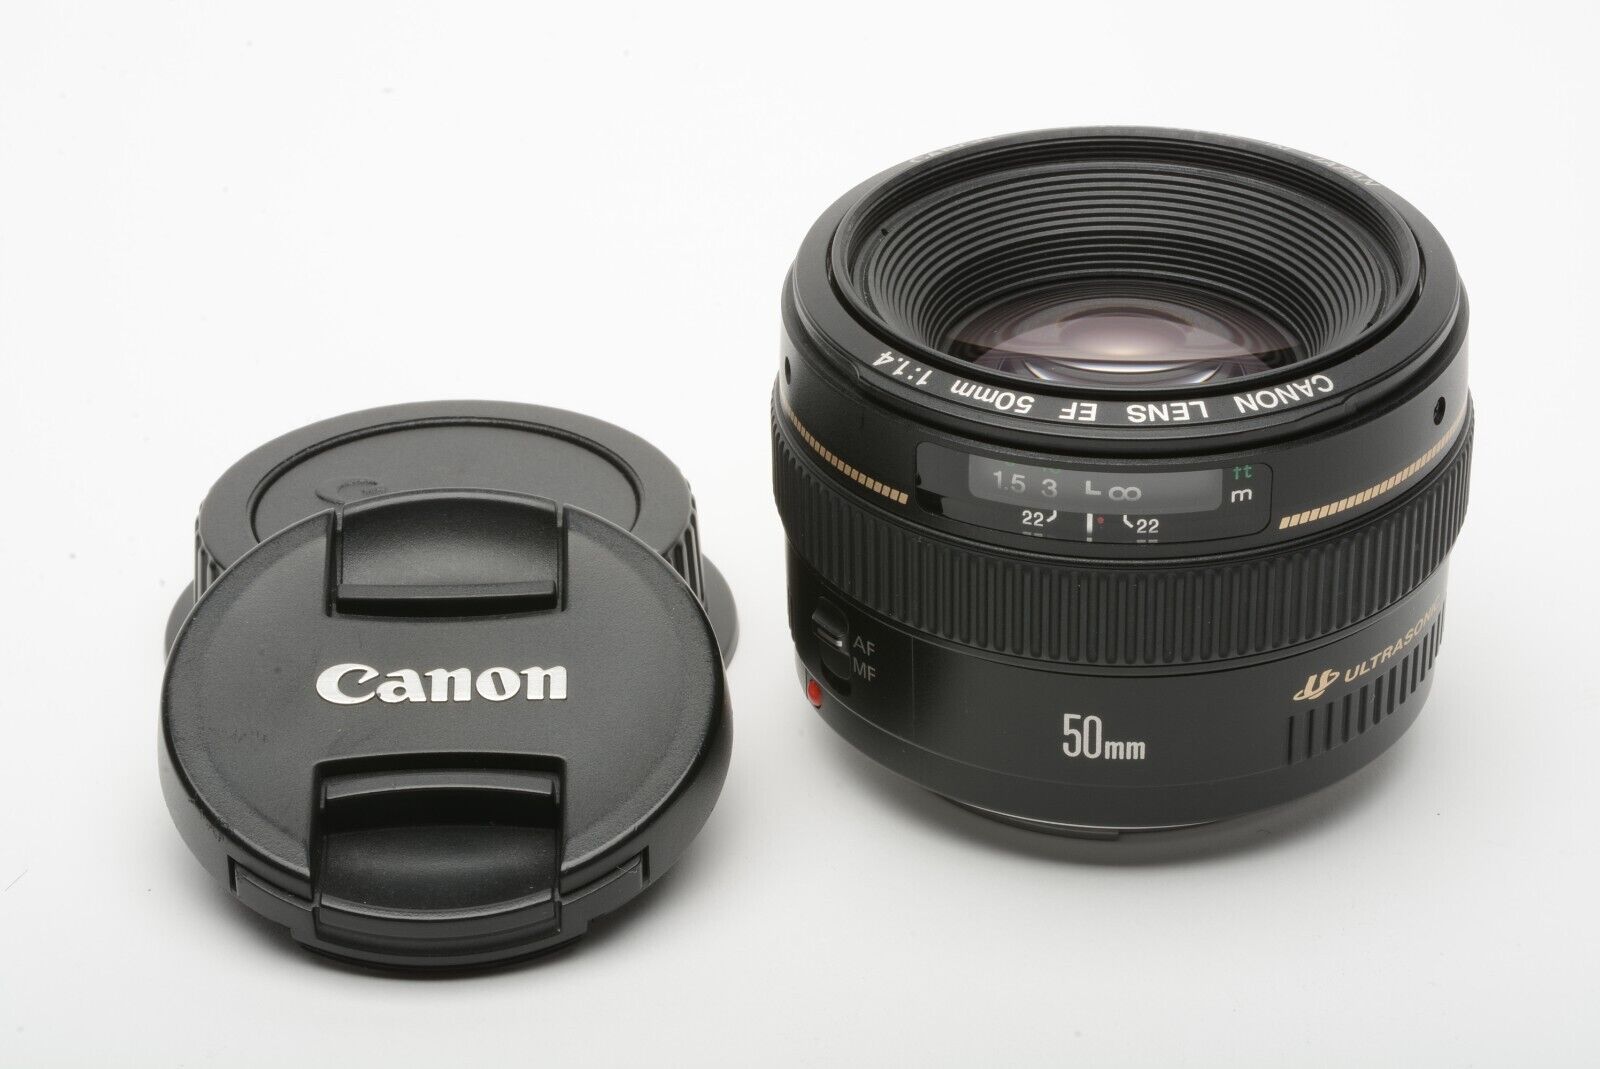 MINT- CANON EF 50mm f1.4 USM LENS, CAPS VERY CLEAN, NICE PRIME LENS, BARELY  USED